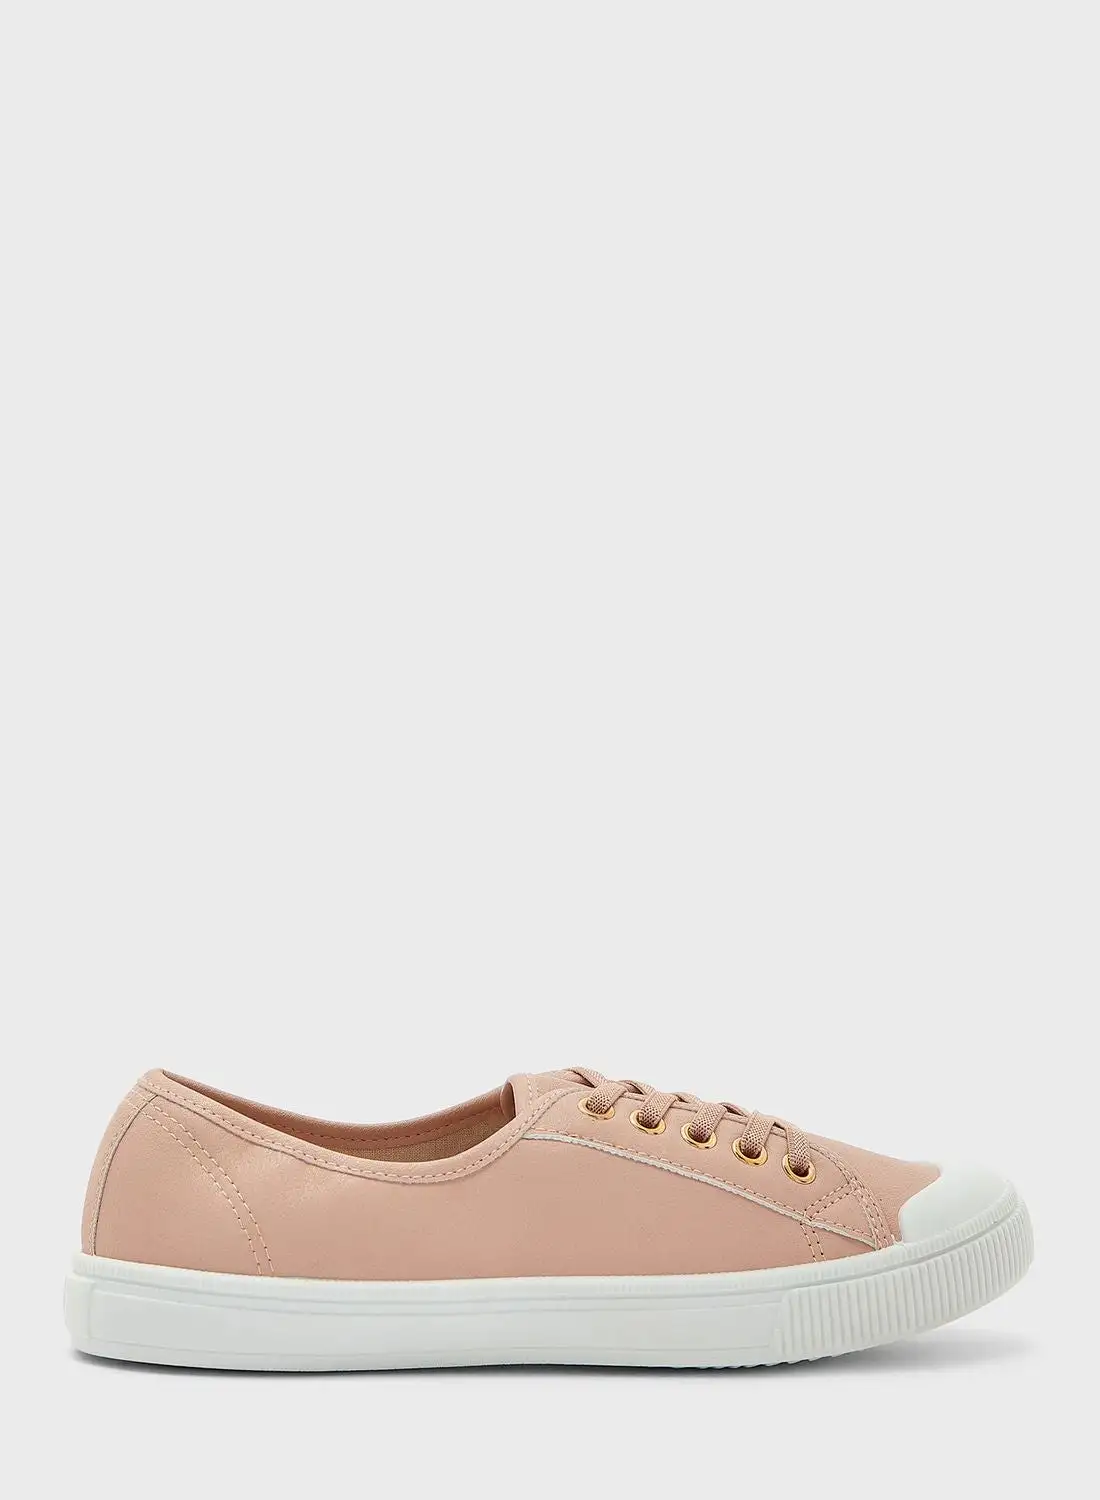 NEW LOOK Marsha Laceless Low Top Sneakers